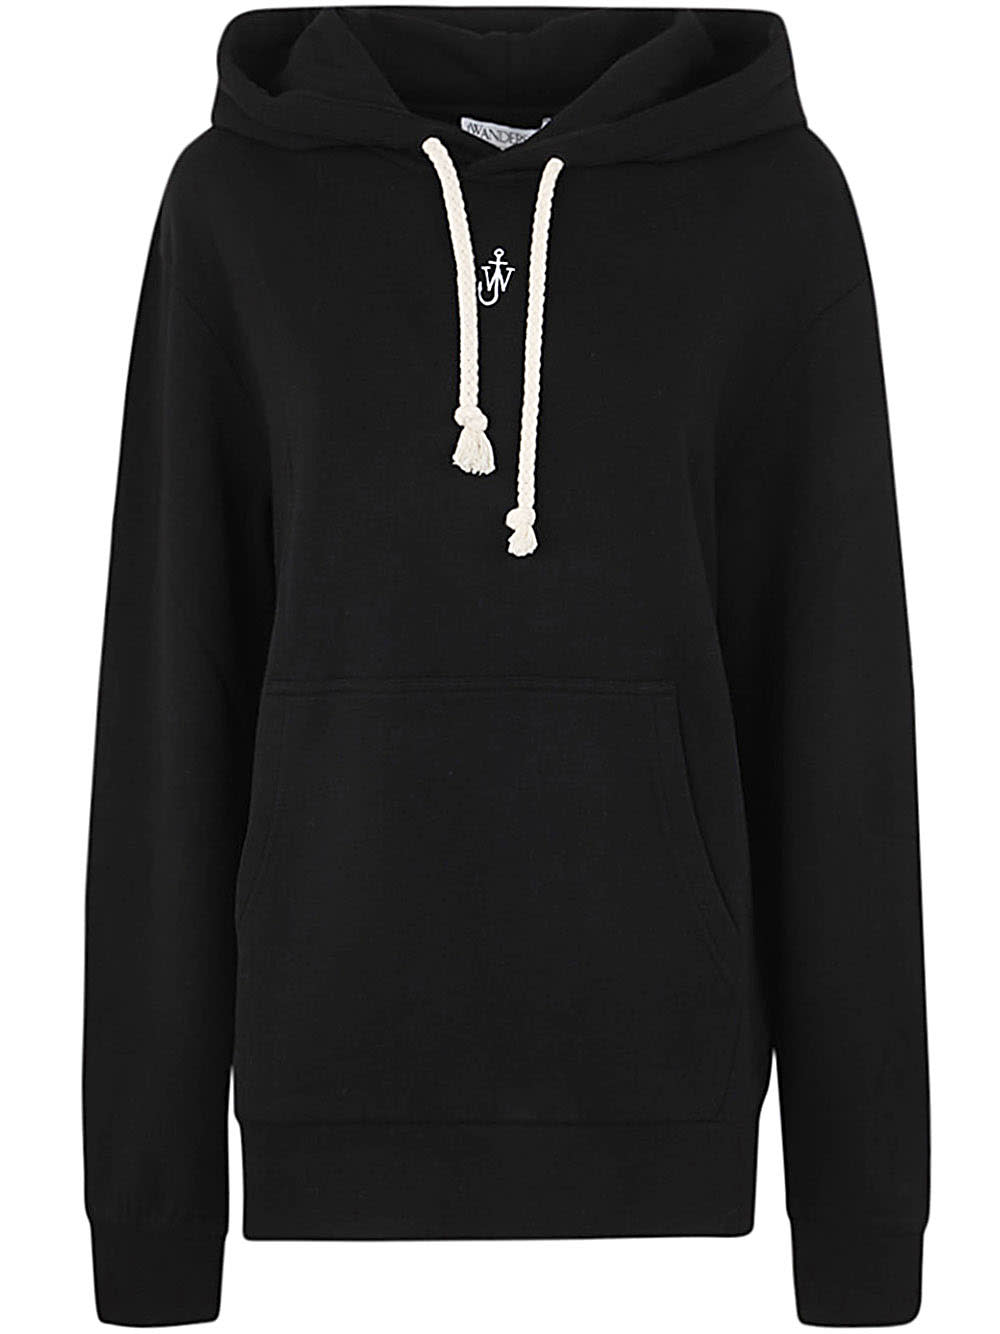 J.W. Anderson Anchor Embroidery Hoodie